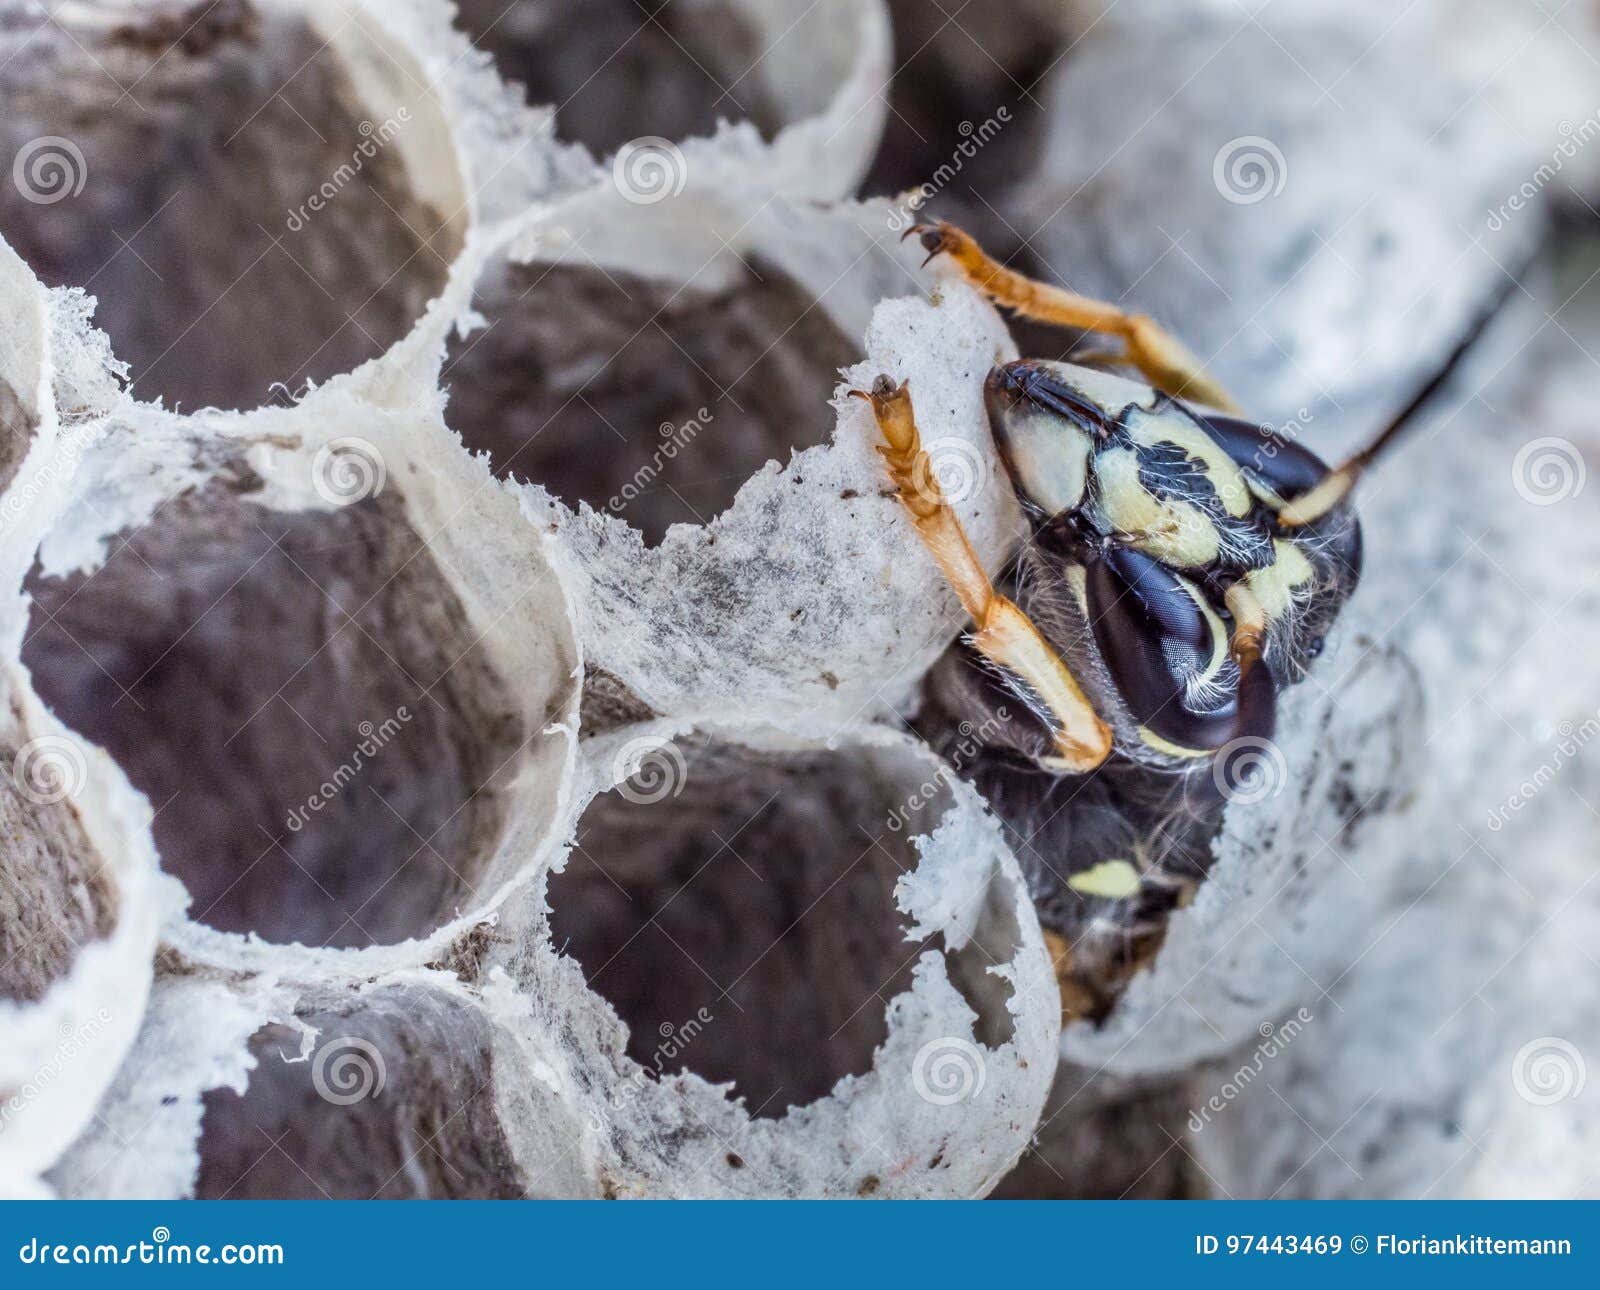 head and torax of a wasp emerging from a wasps nest